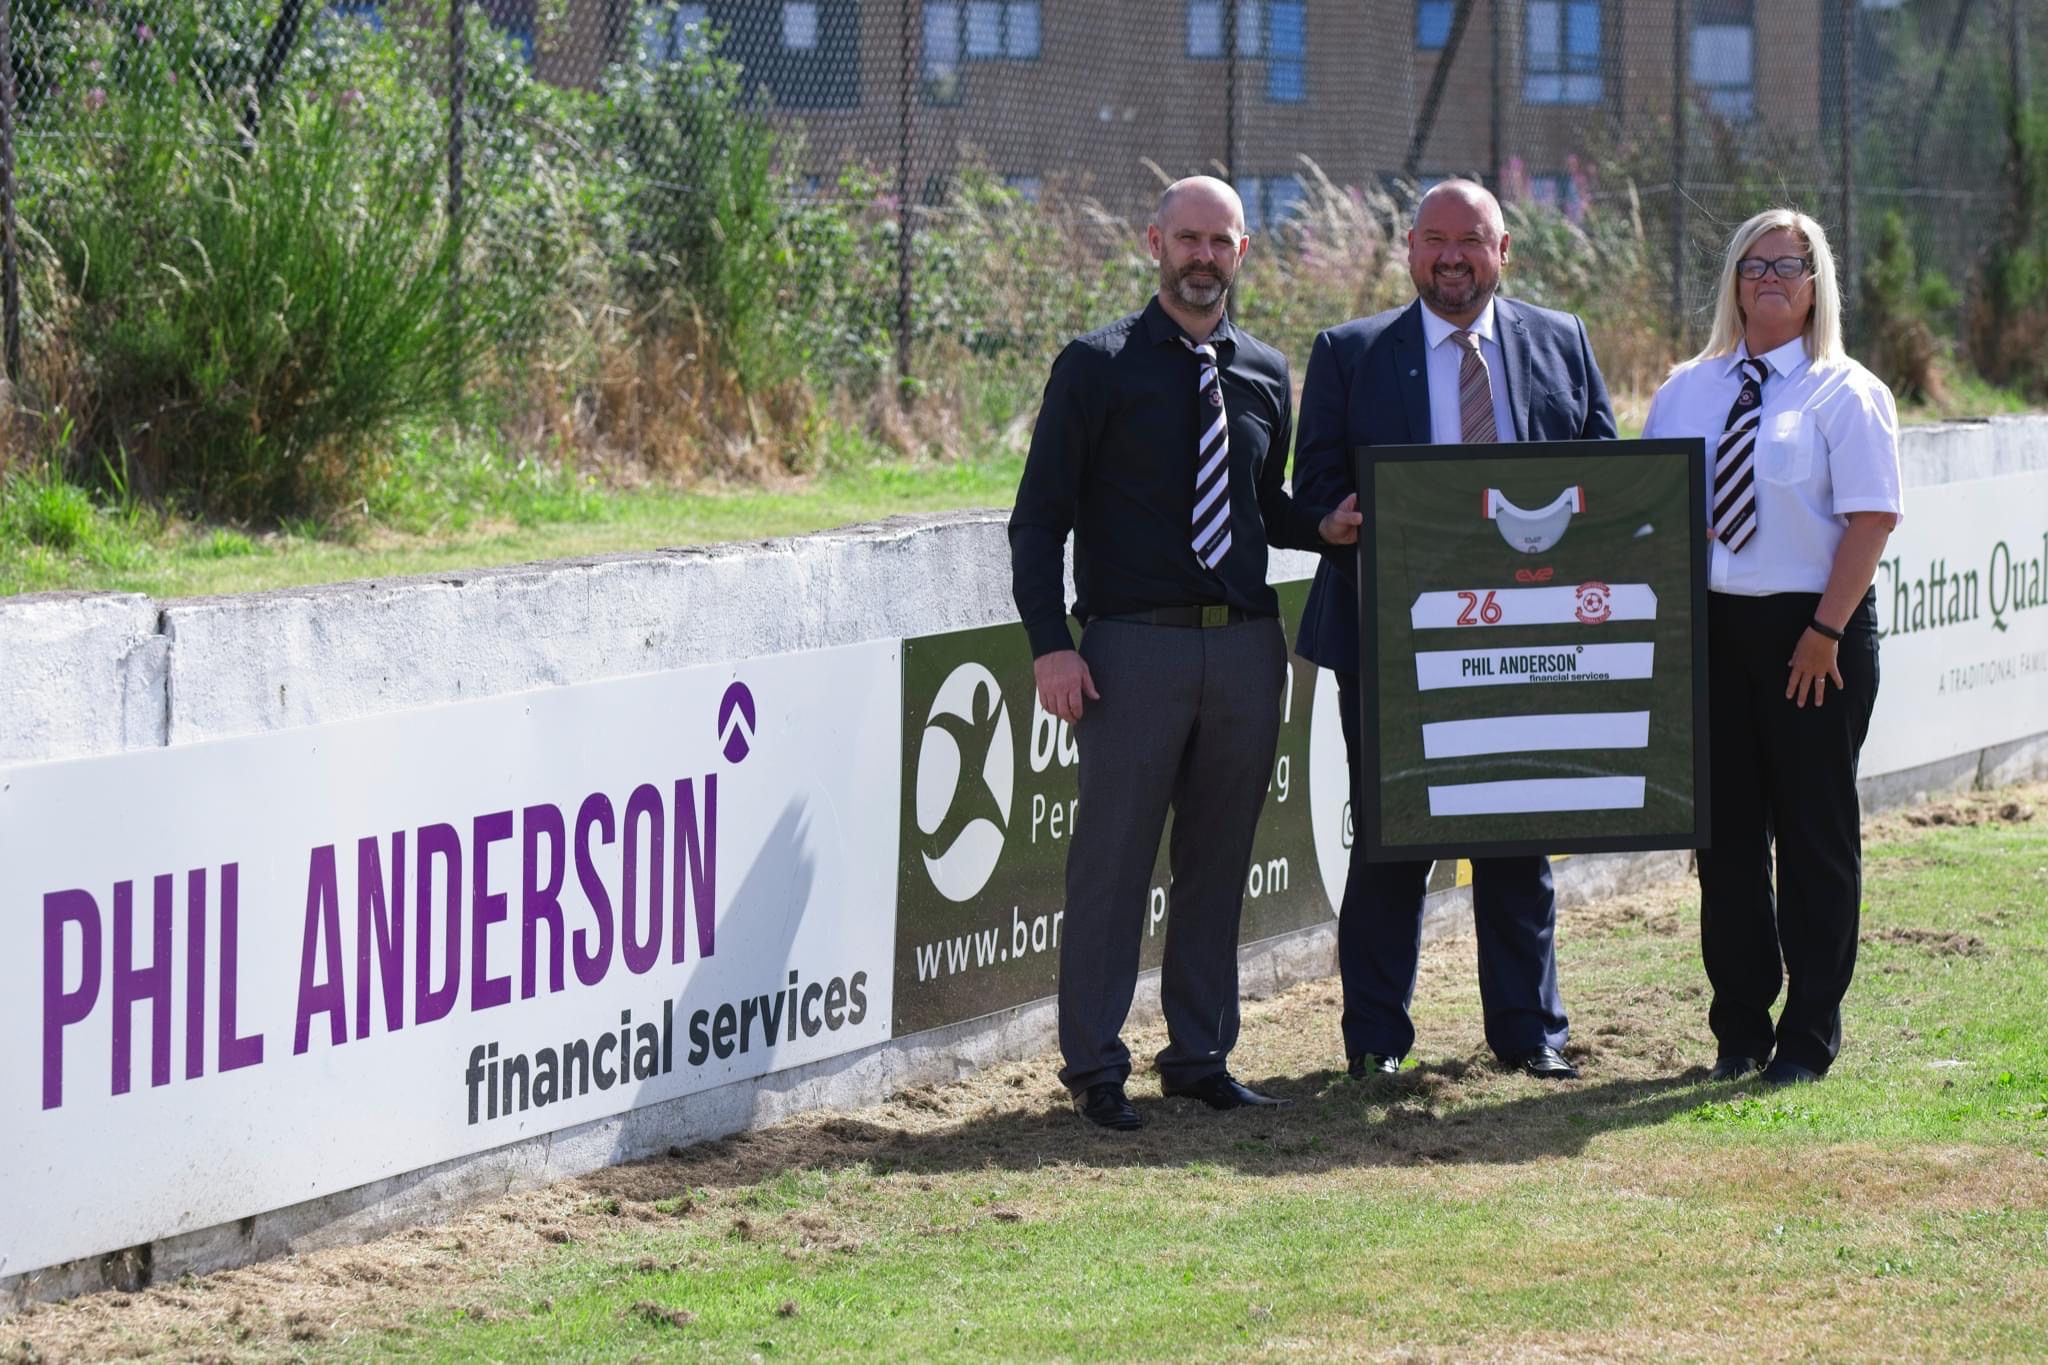 Phil Anderson Financial Services scores with Sunnybank FC sponsorship